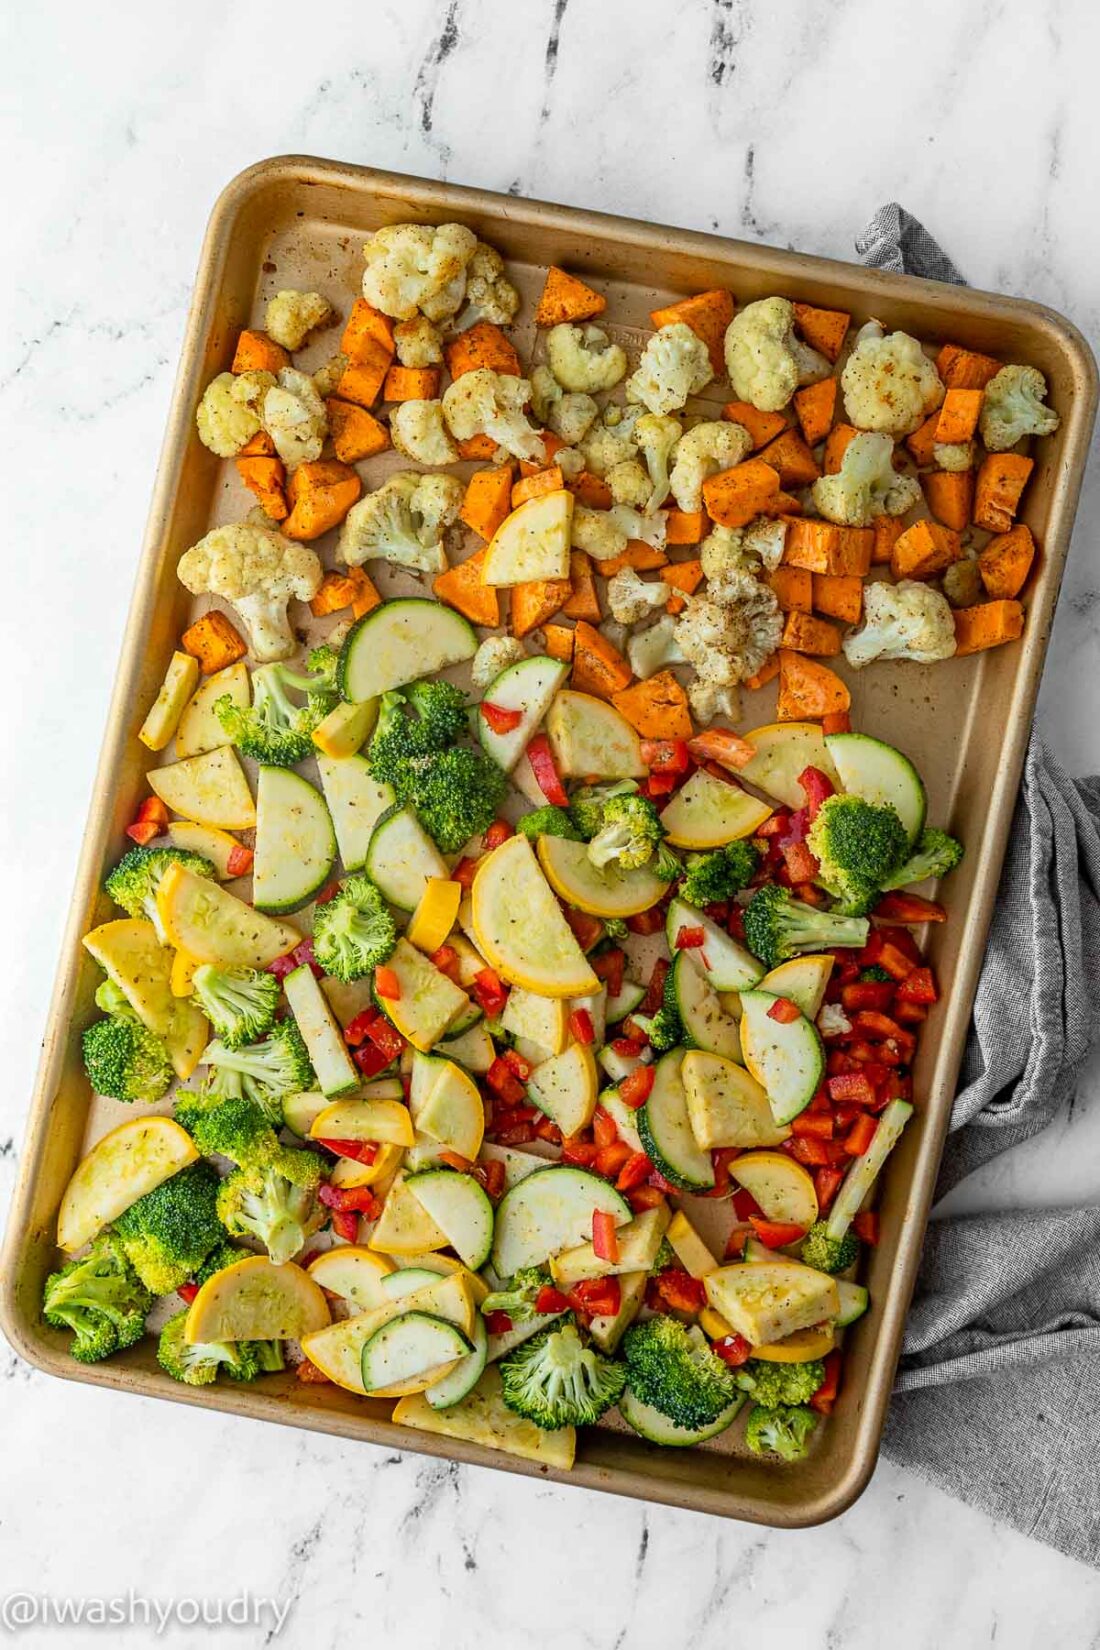 Raw zucchini, squash, bell pepper, and broccoli on pan with roasted sweet potatoes and cauliflower. 